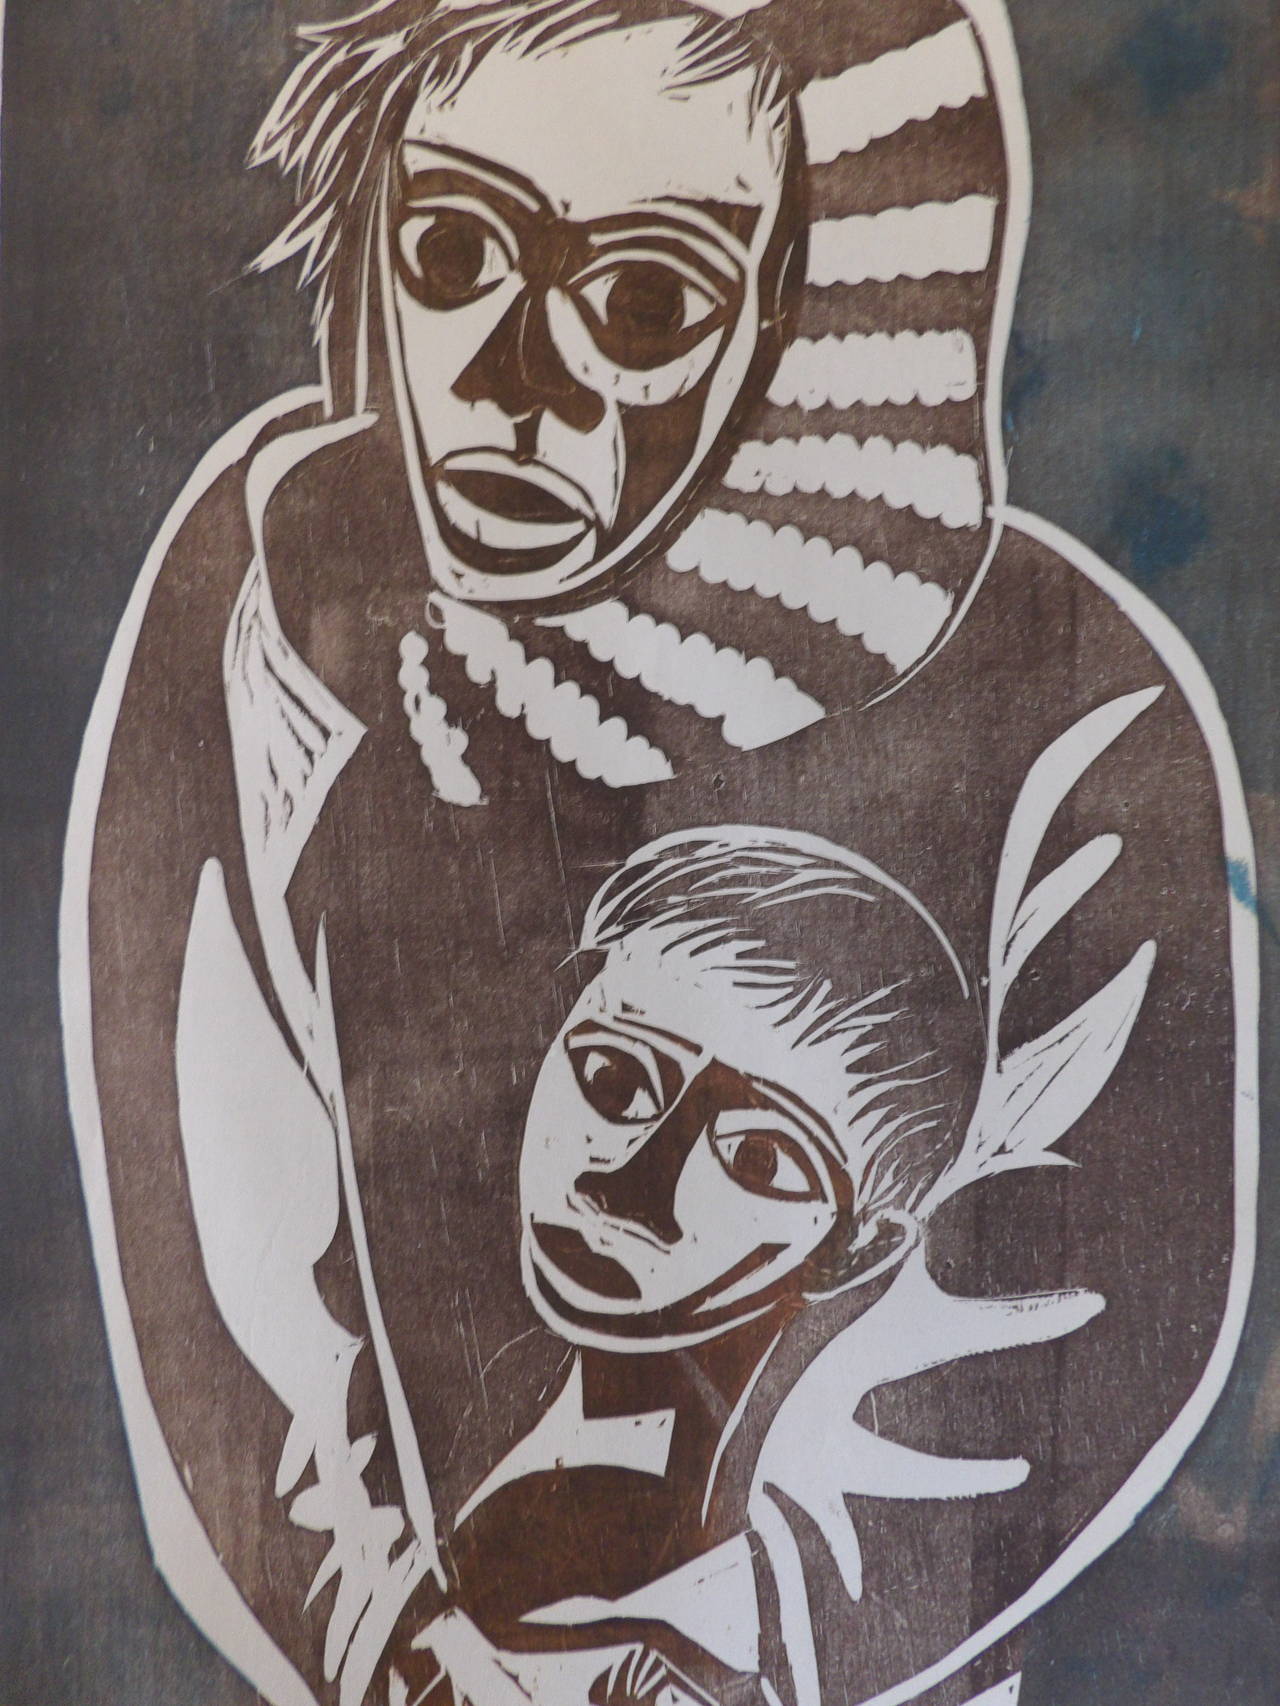 Herman Volz Postmodern Expressionist Woodcut Print In Excellent Condition For Sale In Fulton, CA